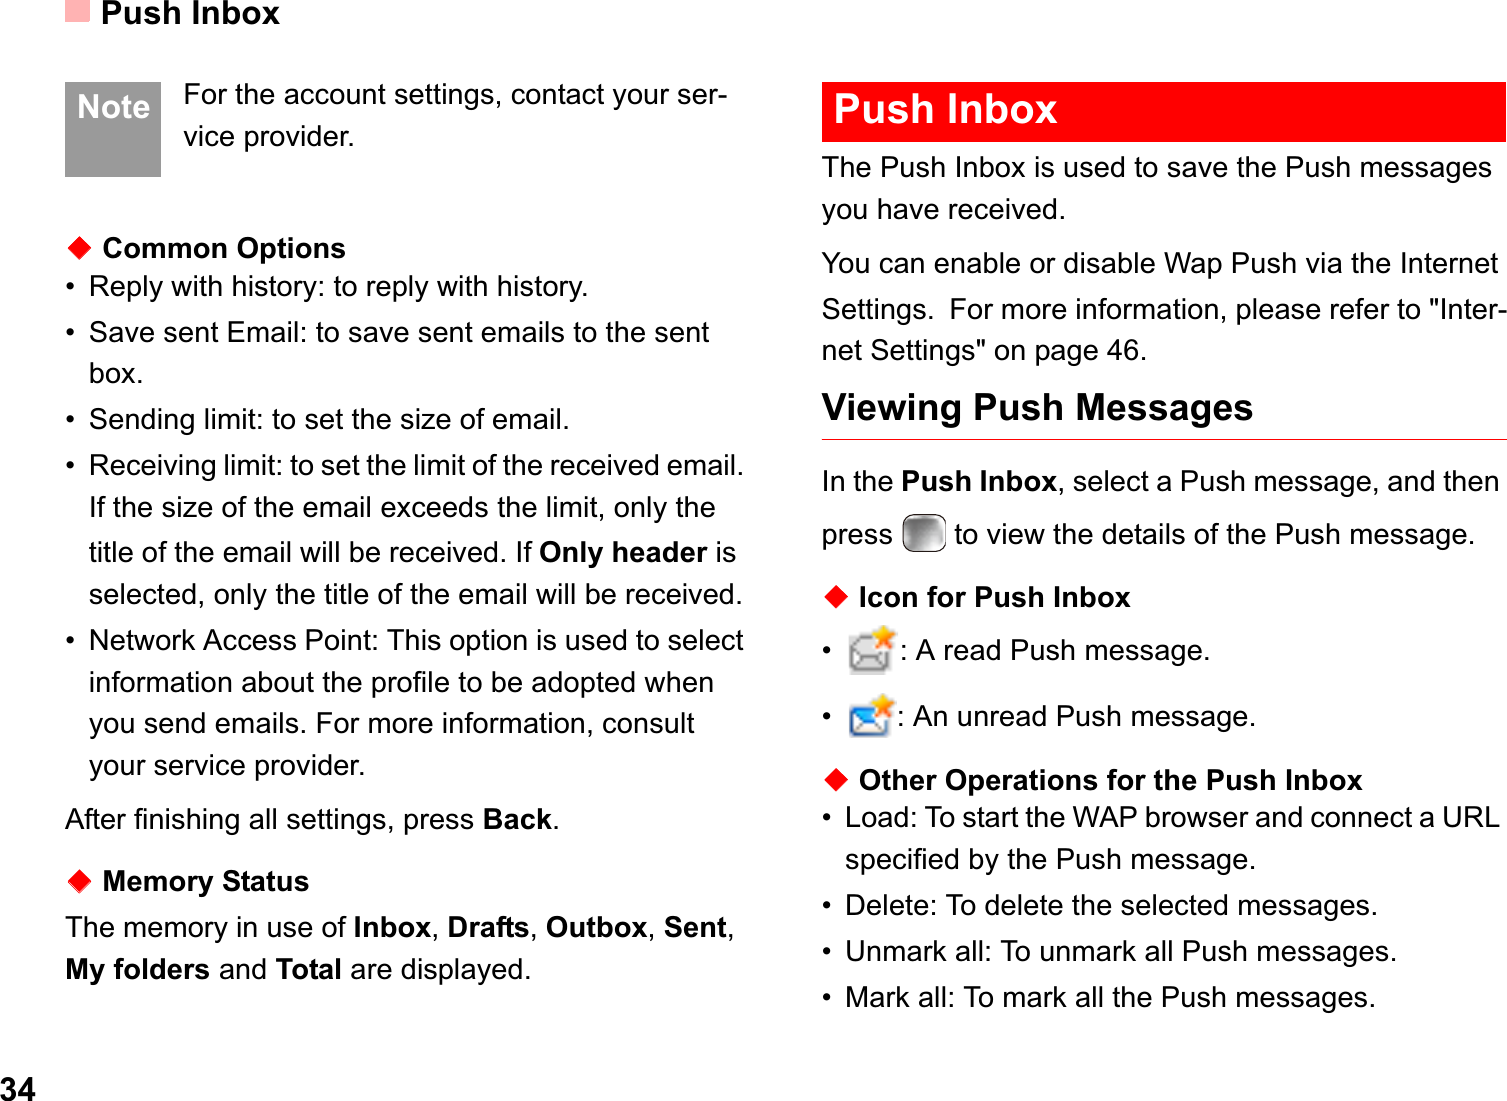 Push Inbox34 Note For the account settings, contact your ser-vice provider.ƹCommon Options• Reply with history: to reply with history.• Save sent Email: to save sent emails to the sent box.• Sending limit: to set the size of email.• Receiving limit: to set the limit of the received email. If the size of the email exceeds the limit, only the title of the email will be received. If Only header isselected, only the title of the email will be received.• Network Access Point: This option is used to select information about the profile to be adopted when you send emails. For more information, consult your service provider.After finishing all settings, press Back.ƹMemory StatusThe memory in use of Inbox,Drafts,Outbox,Sent,My folders and Total are displayed.Push InboxThe Push Inbox is used to save the Push messages you have received.You can enable or disable Wap Push via the Internet Settings.For more information, please refer to &quot;Inter-net Settings&quot; on page 46.Viewing Push MessagesIn the Push Inbox, select a Push message, and then press   to view the details of the Push message.ƹIcon for Push Inbox• : A read Push message.• : An unread Push message.ƹOther Operations for the Push Inbox• Load: To start the WAP browser and connect a URL specified by the Push message.• Delete: To delete the selected messages.• Unmark all: To unmark all Push messages.• Mark all: To mark all the Push messages.